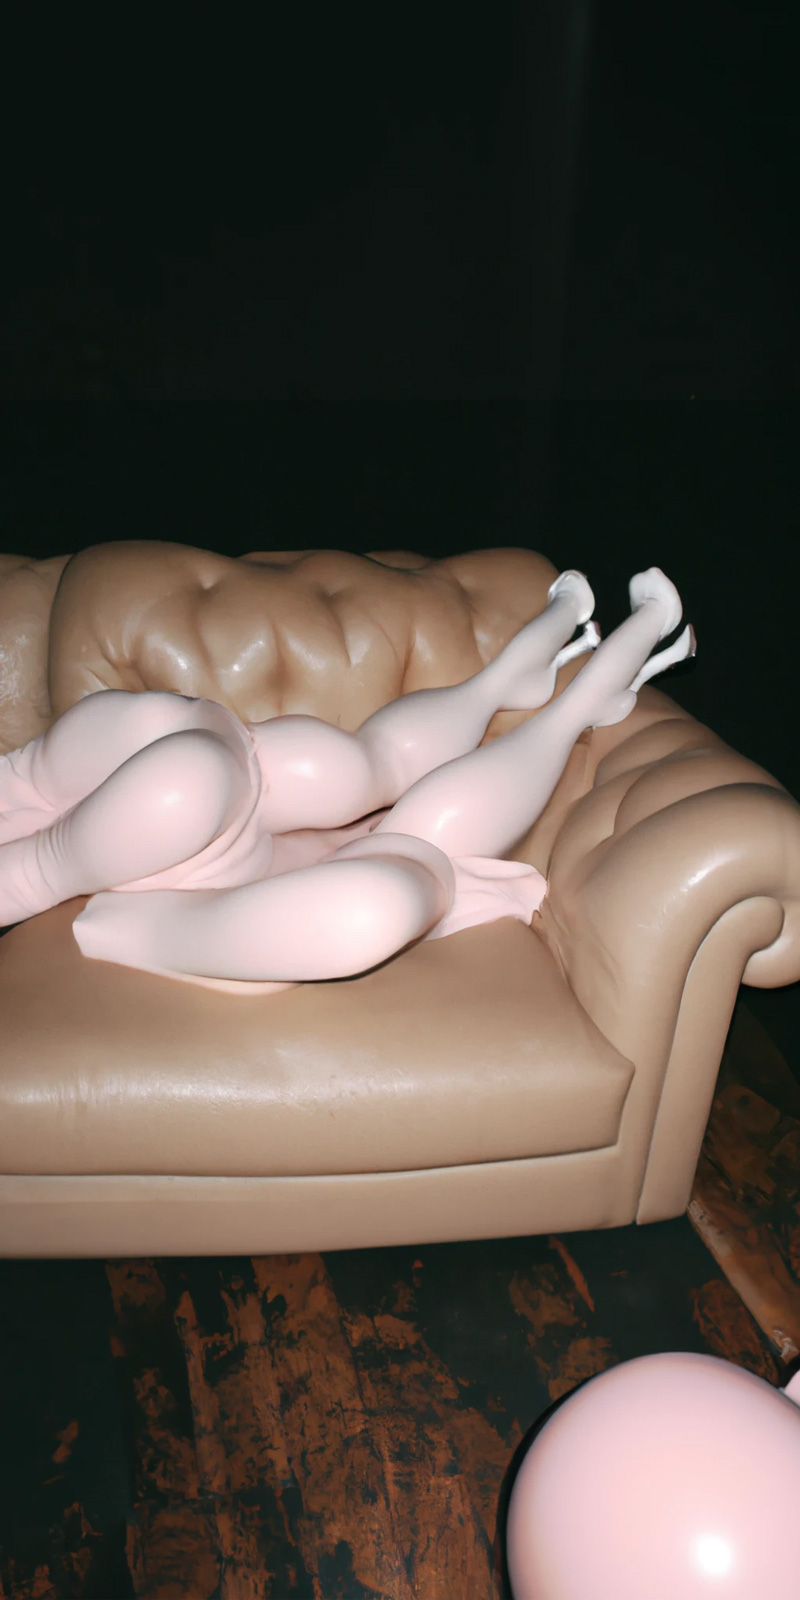 AI-generated image of a dimly lit domestic interior with what look like melting mannequin limbs